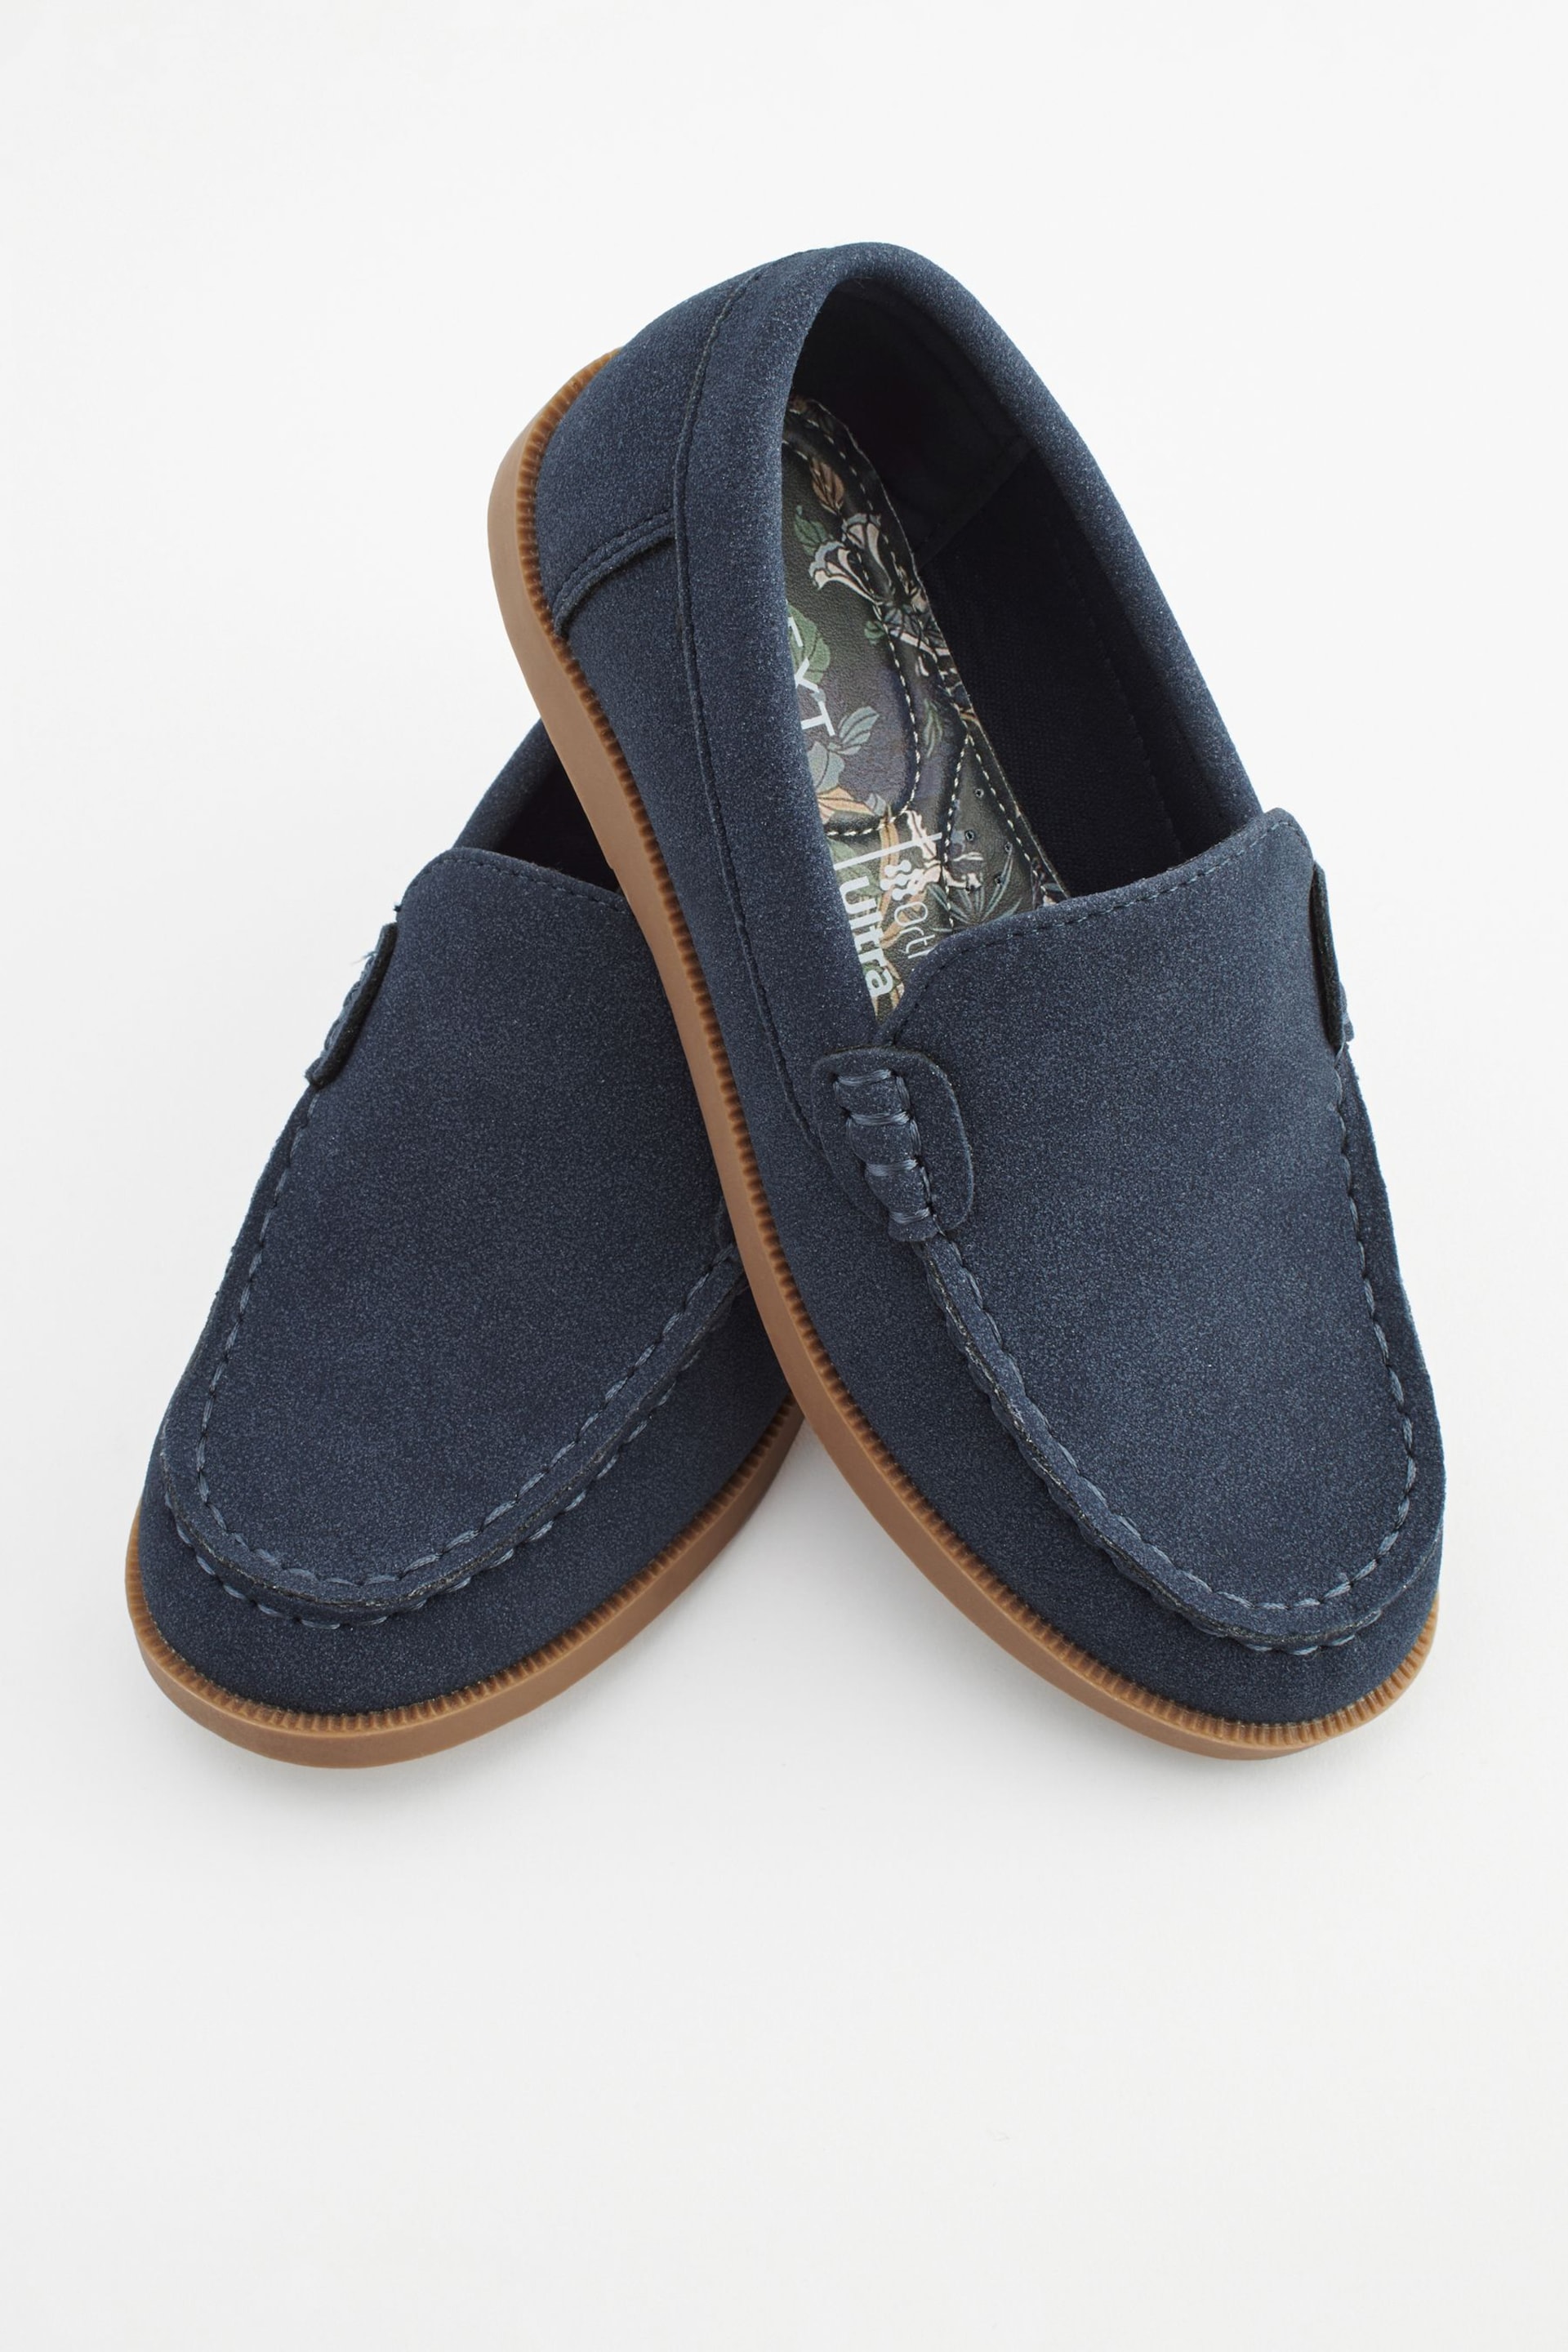 Navy Loafers - Image 6 of 7